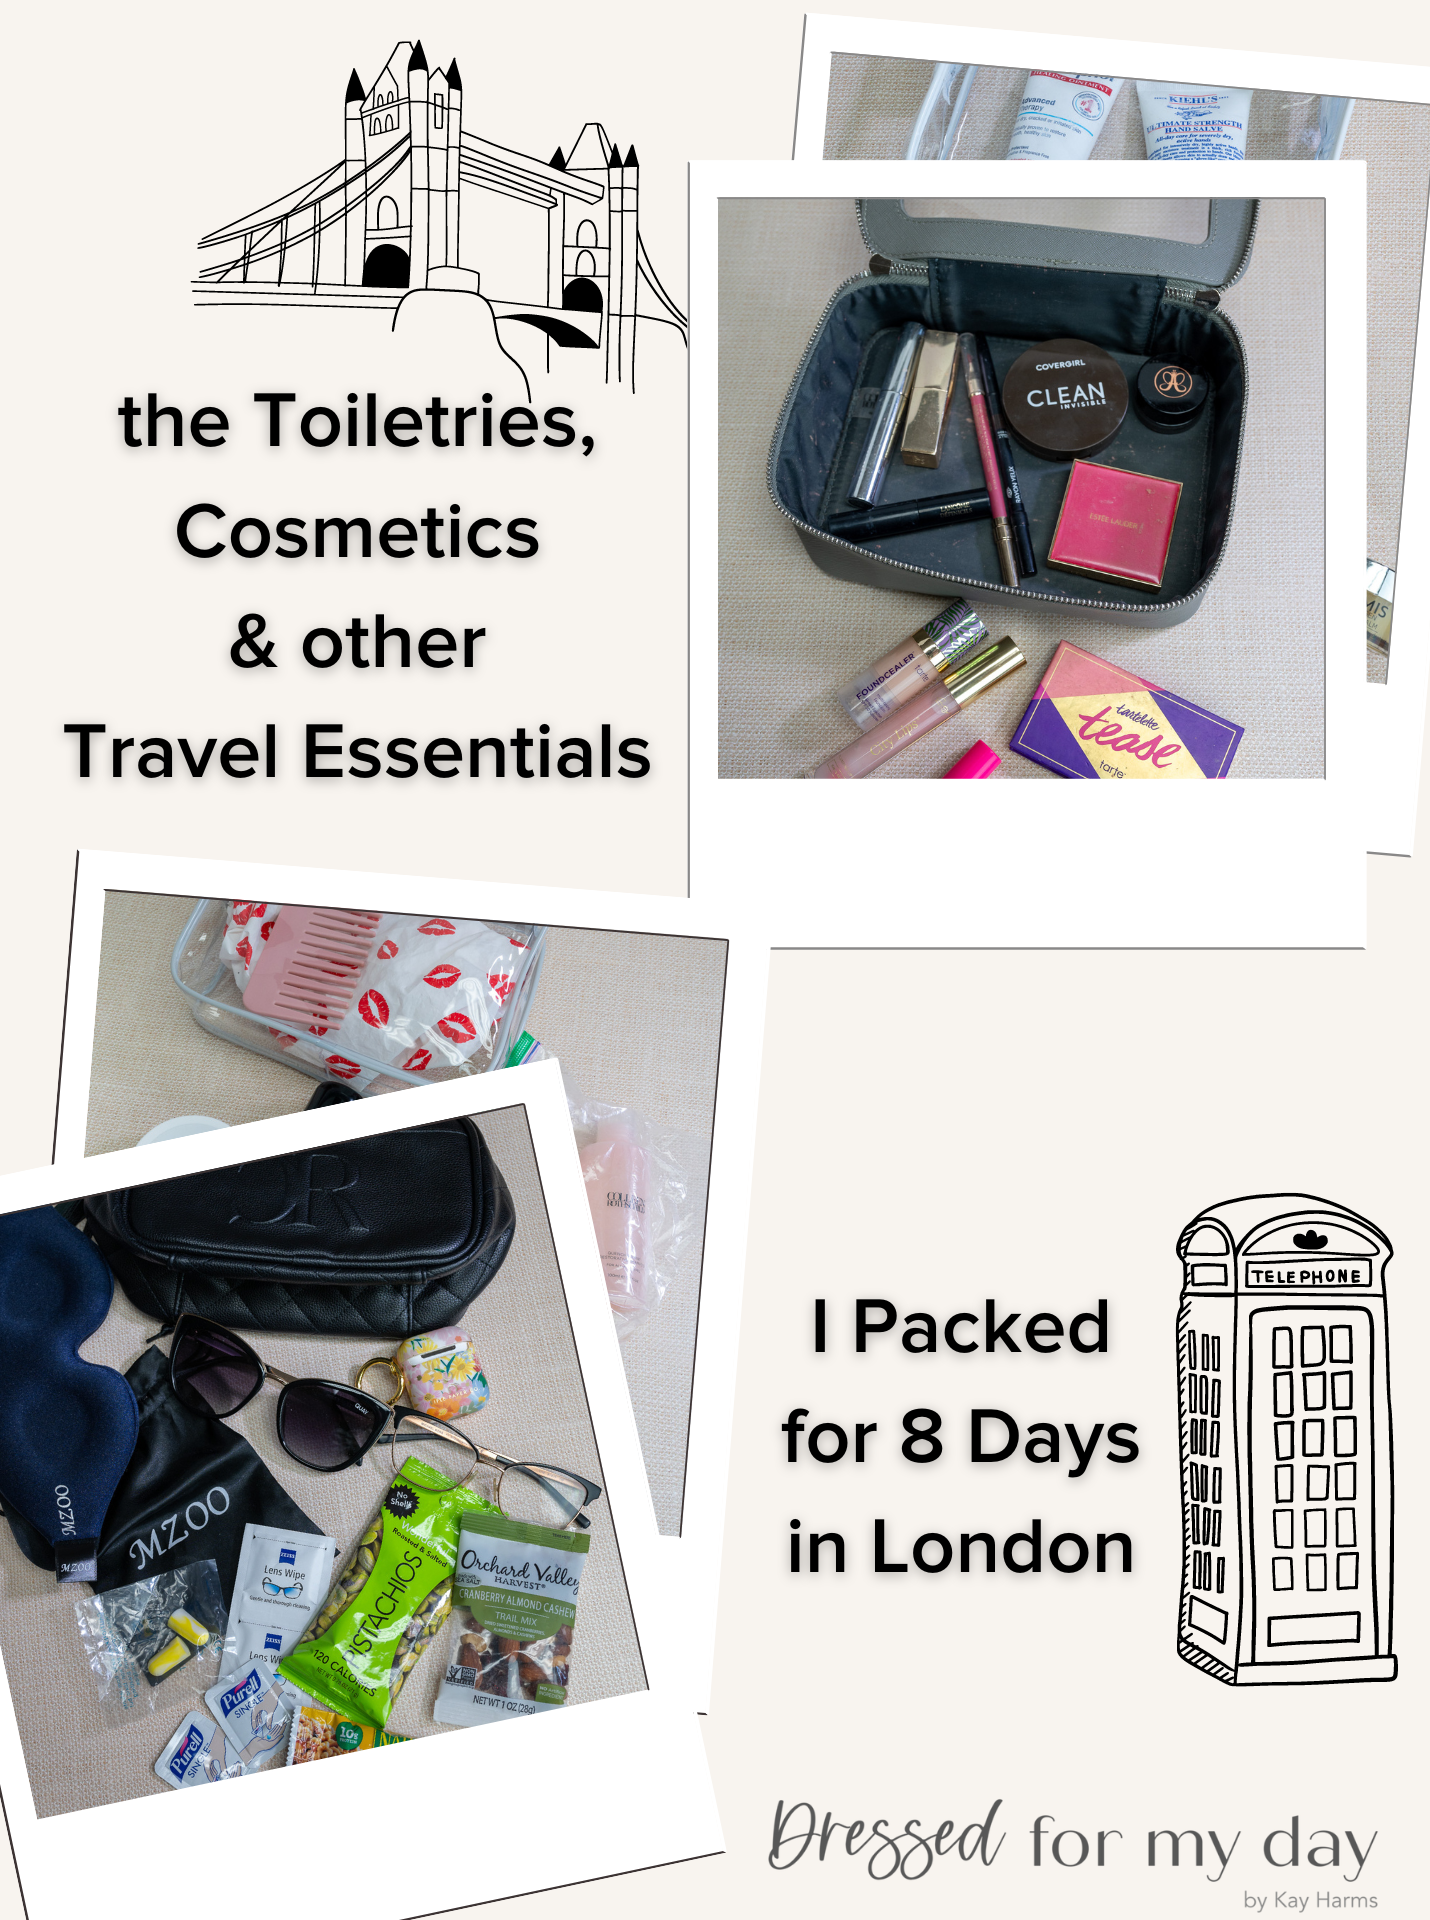 the Toiletries, Cosmetics & other Travel Essentials I Packed for an 8-day trip to London